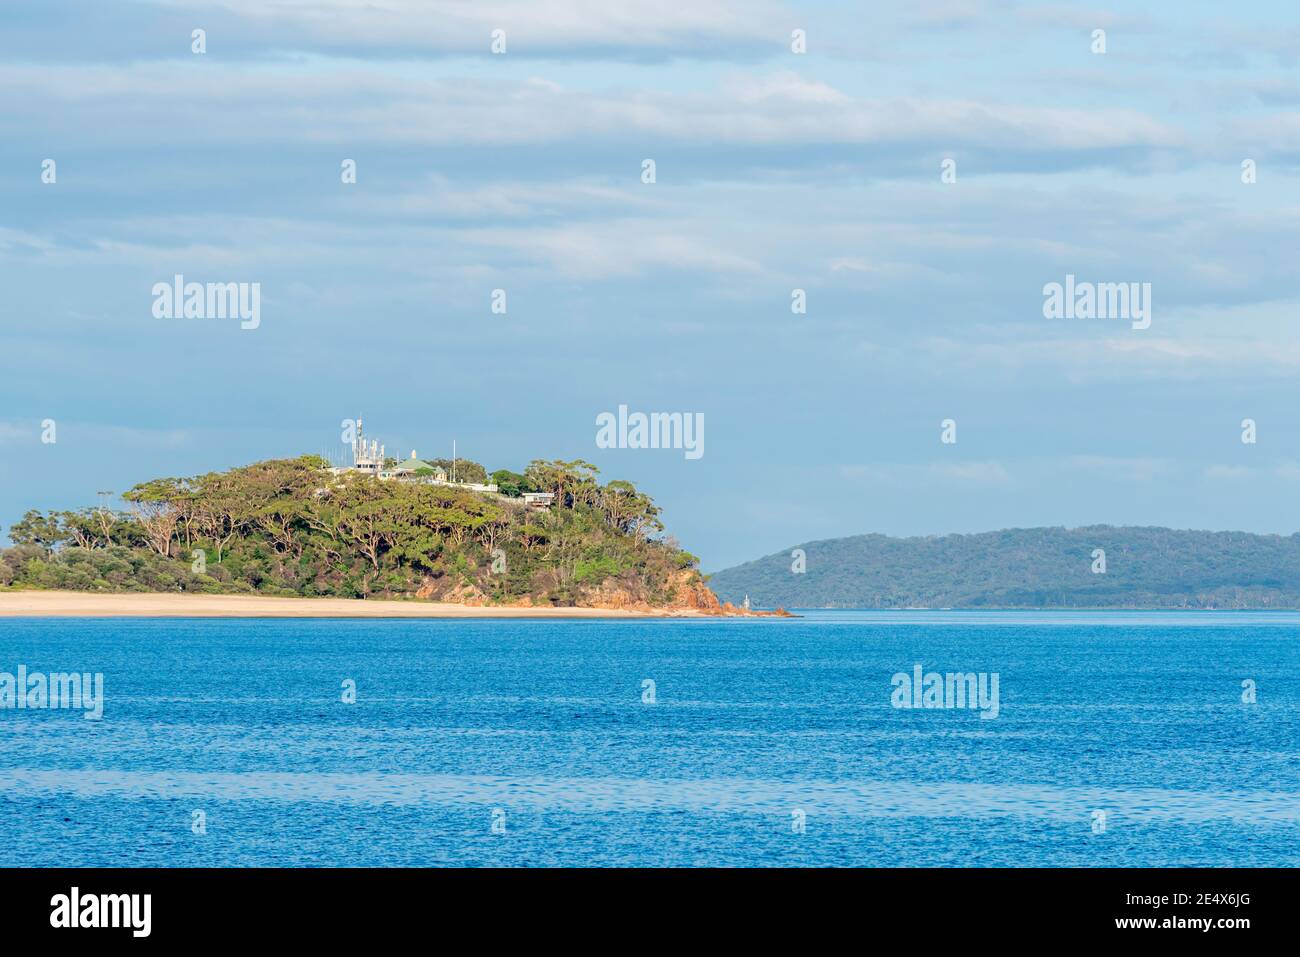 Looking west towards Shoal Bay and the Nelson Bay lighthouse from Tomaree Head at the entrance to Port Stephens, New South Wales, Australia Stock Photo